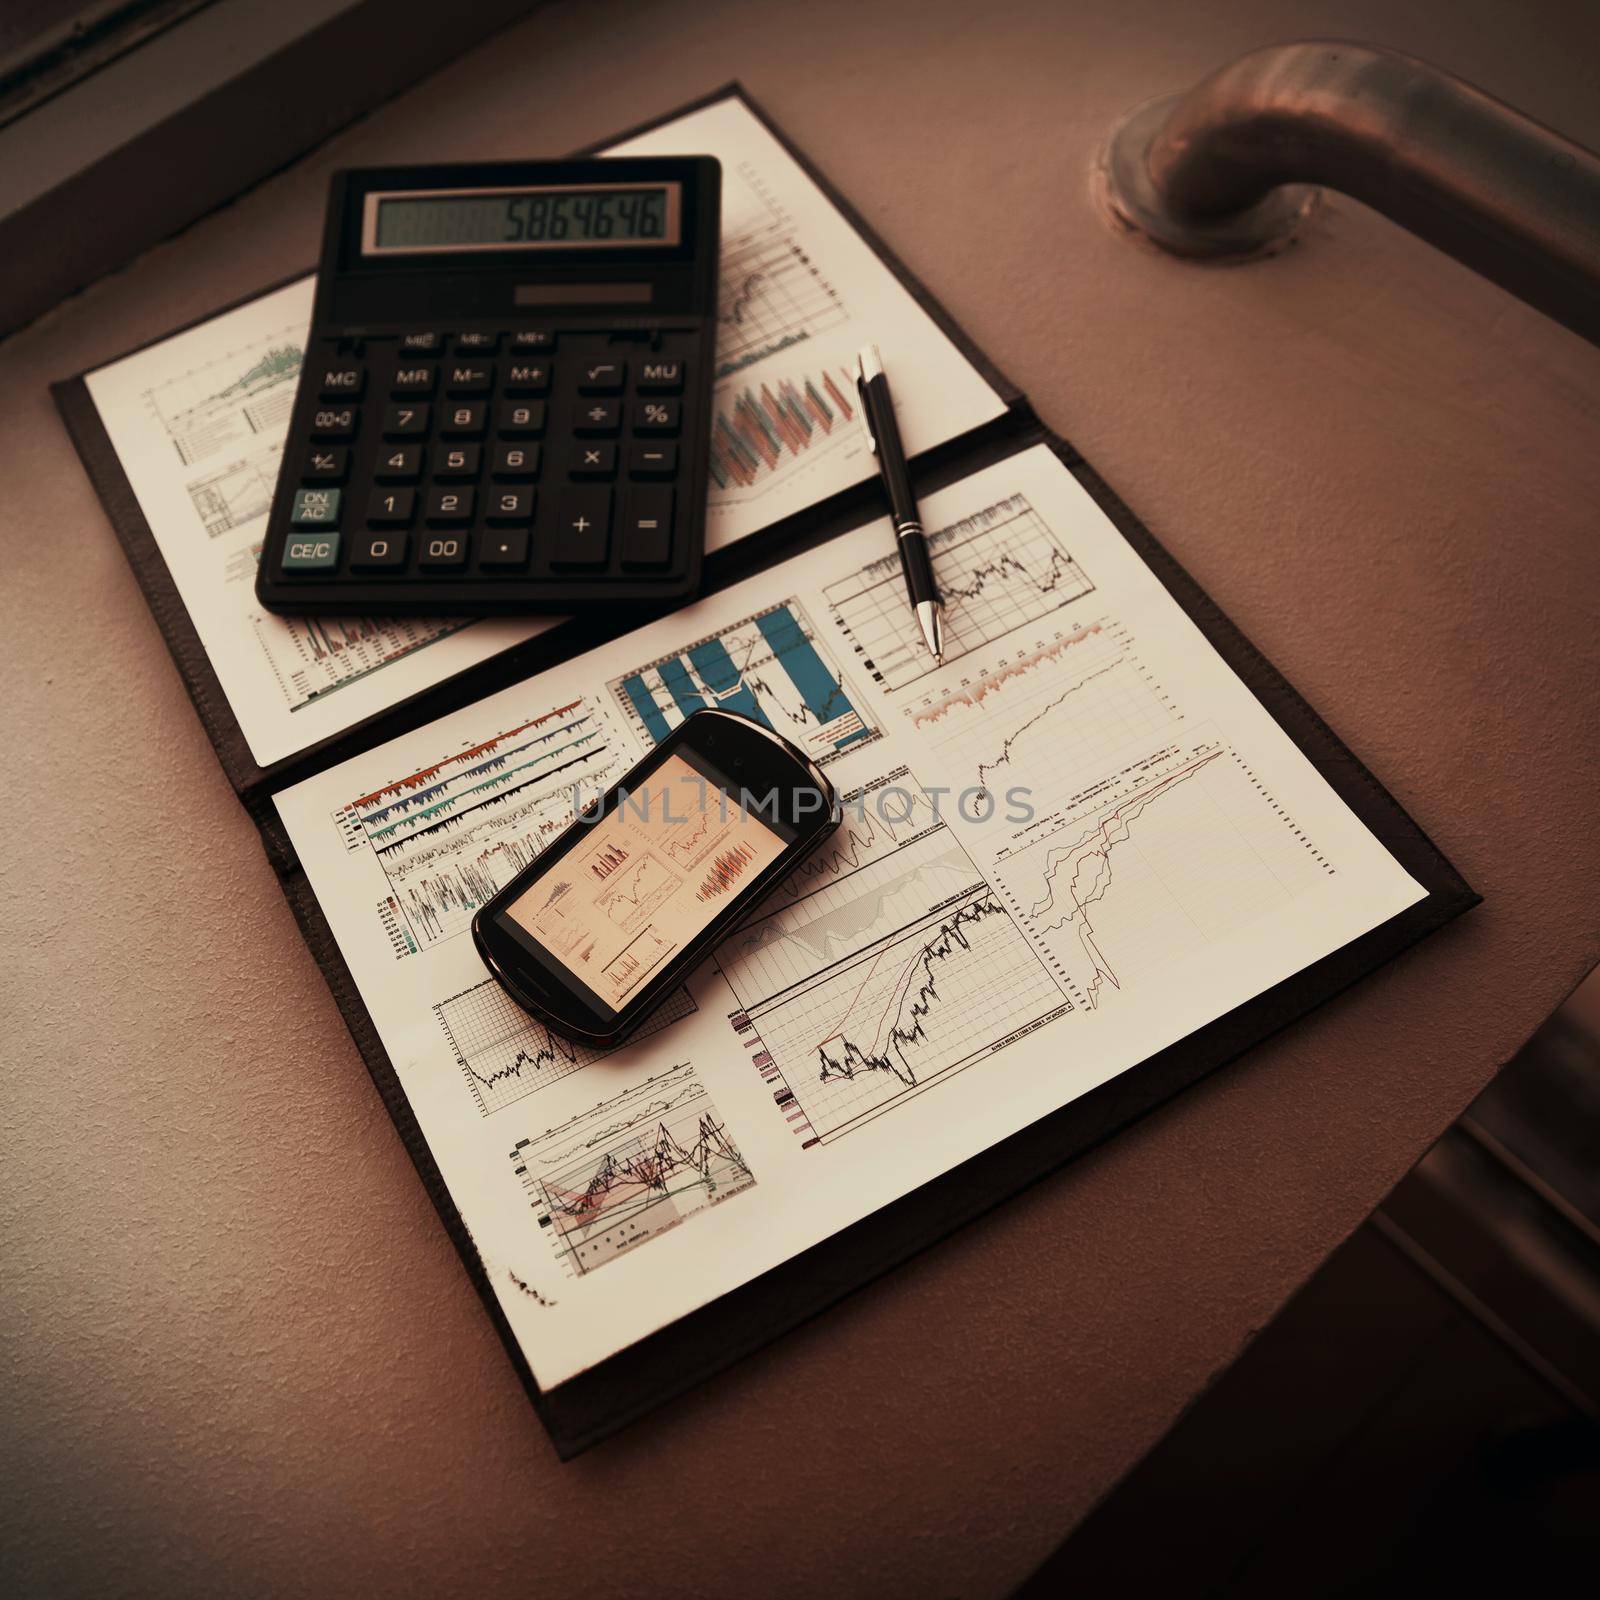 A folder with the charts of financial analysis. Diagrams in the phone's screen, next is calculator and pen on the table